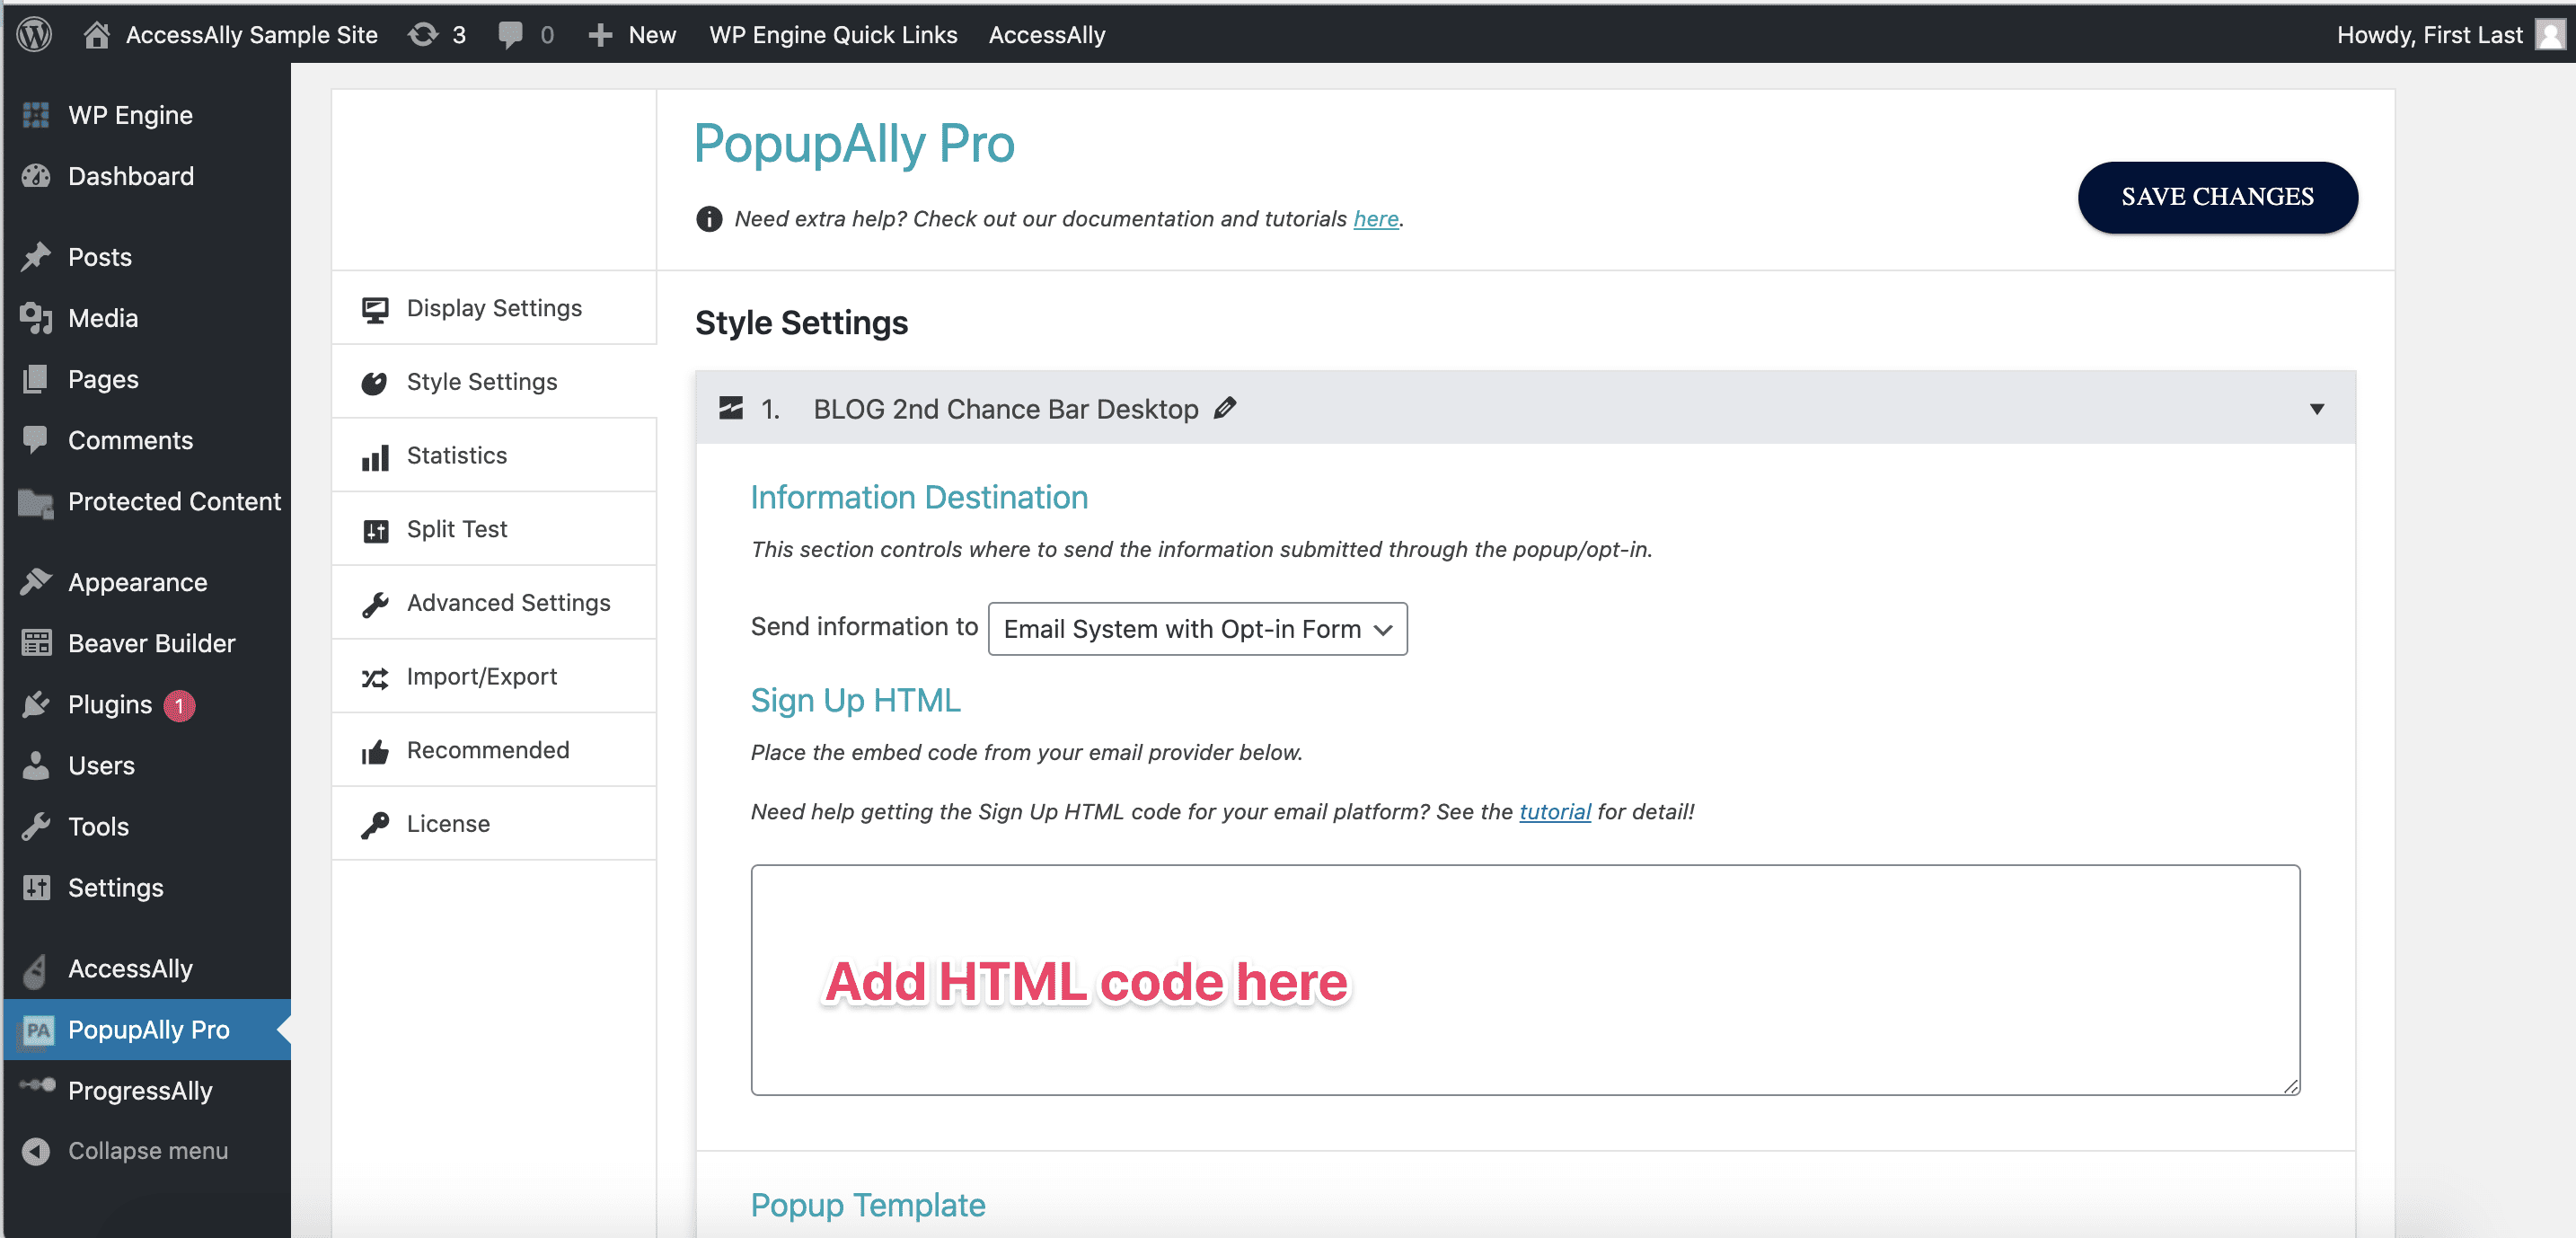 Where to add the HTML code in PopupAlly